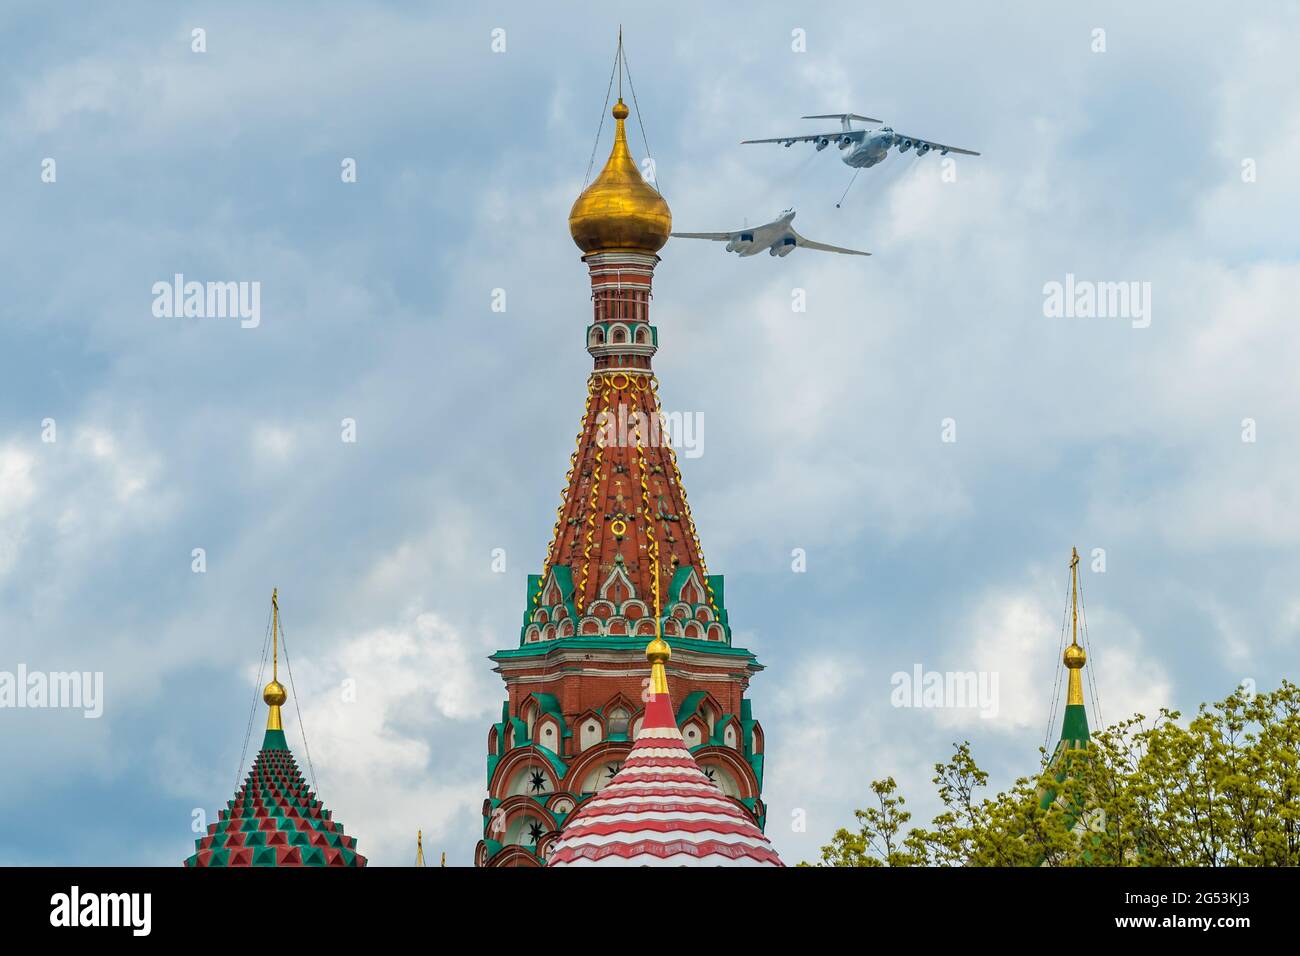 May 7, 2021, Moscow, Russia. An IL-78 tanker plane and a Tu-160 strategic bomber over Red Square in Moscow. Stock Photo